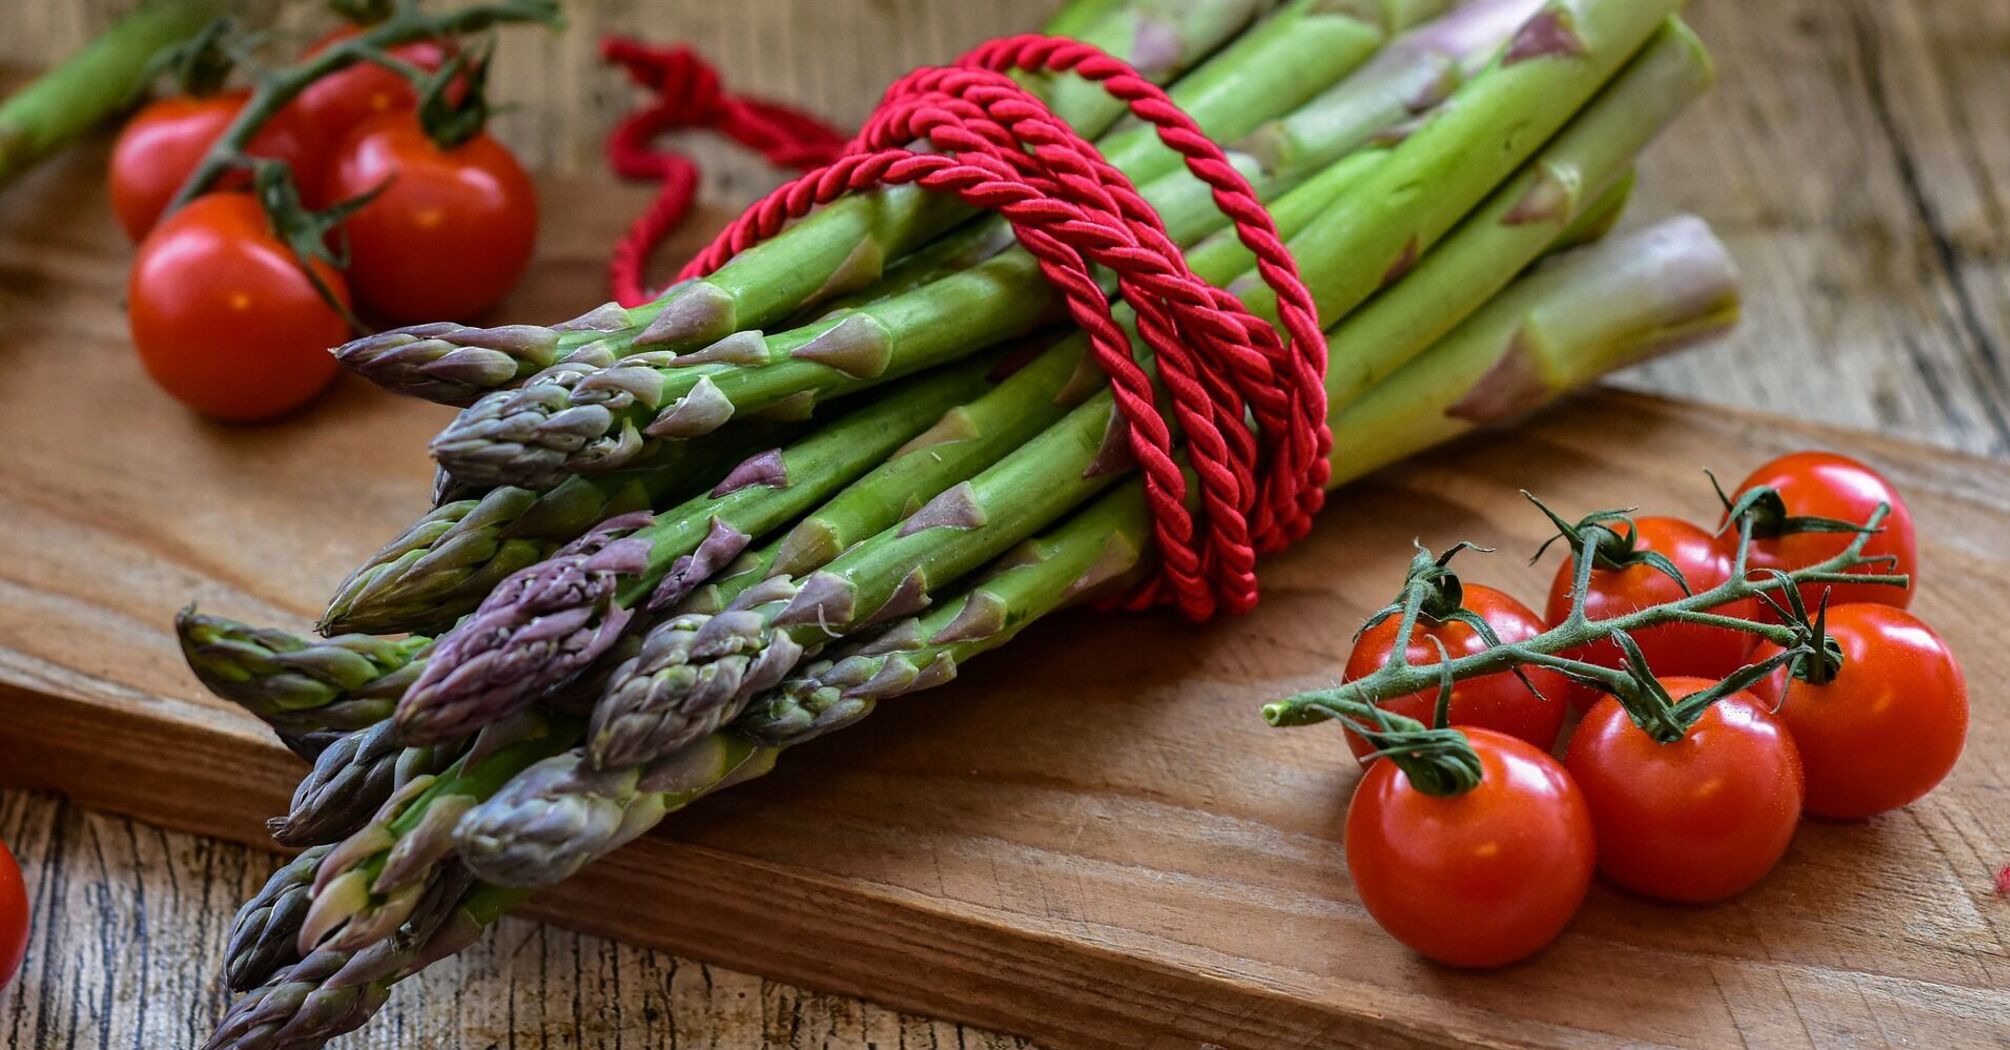 What are the benefits of asparagus